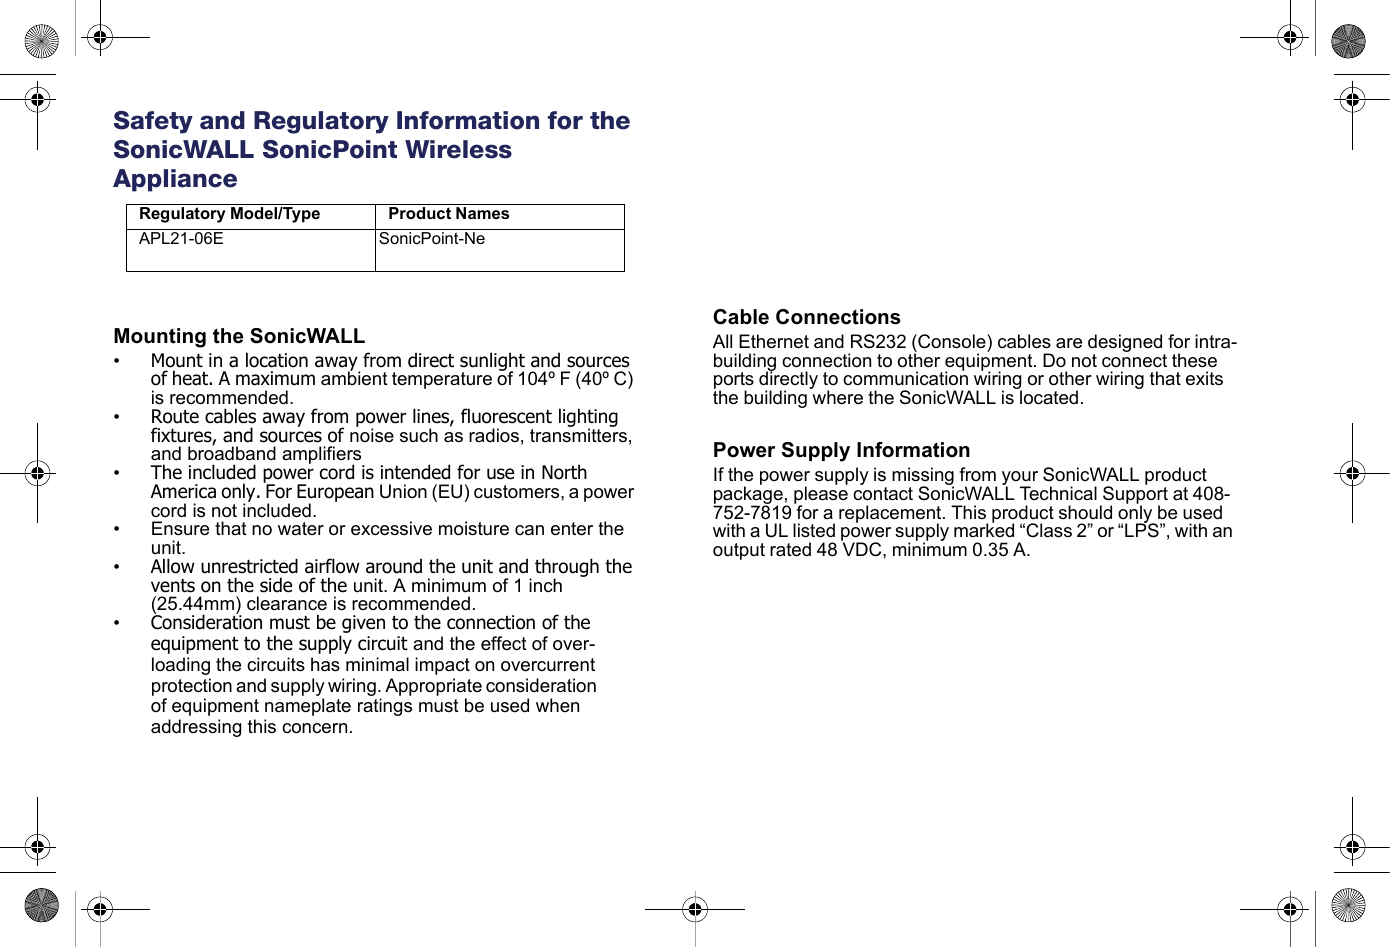   Safety and Regulatory Information for the SonicWALL SonicPoint Wireless ApplianceMounting the SonicWALL•Mount in a location away from direct sunlight and sources of heat. A maximum ambient temperature of 104º F (40º C) is recommended.•Route cables away from power lines, fluorescent lighting fixtures, and sources of noise such as radios, transmitters, and broadband amplifiers•The included power cord is intended for use in North America only. For European Union (EU) customers, a power cord is not included.• Ensure that no water or excessive moisture can enter the unit.•Allow unrestricted airflow around the unit and through the vents on the side of the unit. A minimum of 1 inch (25.44mm) clearance is recommended.•Consideration must be given to the connection of the equipment to the supply circuit and the effect of over-loading the circuits has minimal impact on overcurrent protection and supply wiring. Appropriate consideration of equipment nameplate ratings must be used when addressing this concern.Cable ConnectionsAll Ethernet and RS232 (Console) cables are designed for intra-building connection to other equipment. Do not connect these ports directly to communication wiring or other wiring that exits the building where the SonicWALL is located. Power Supply InformationIf the power supply is missing from your SonicWALL product package, please contact SonicWALL Technical Support at 408-752-7819 for a replacement. This product should only be used with a UL listed power supply marked “Class 2” or “LPS”, with an output rated 48 VDC, minimum 0.35 A.Regulatory Model/Type Product NamesAPL21-06E SonicPoint-Ne